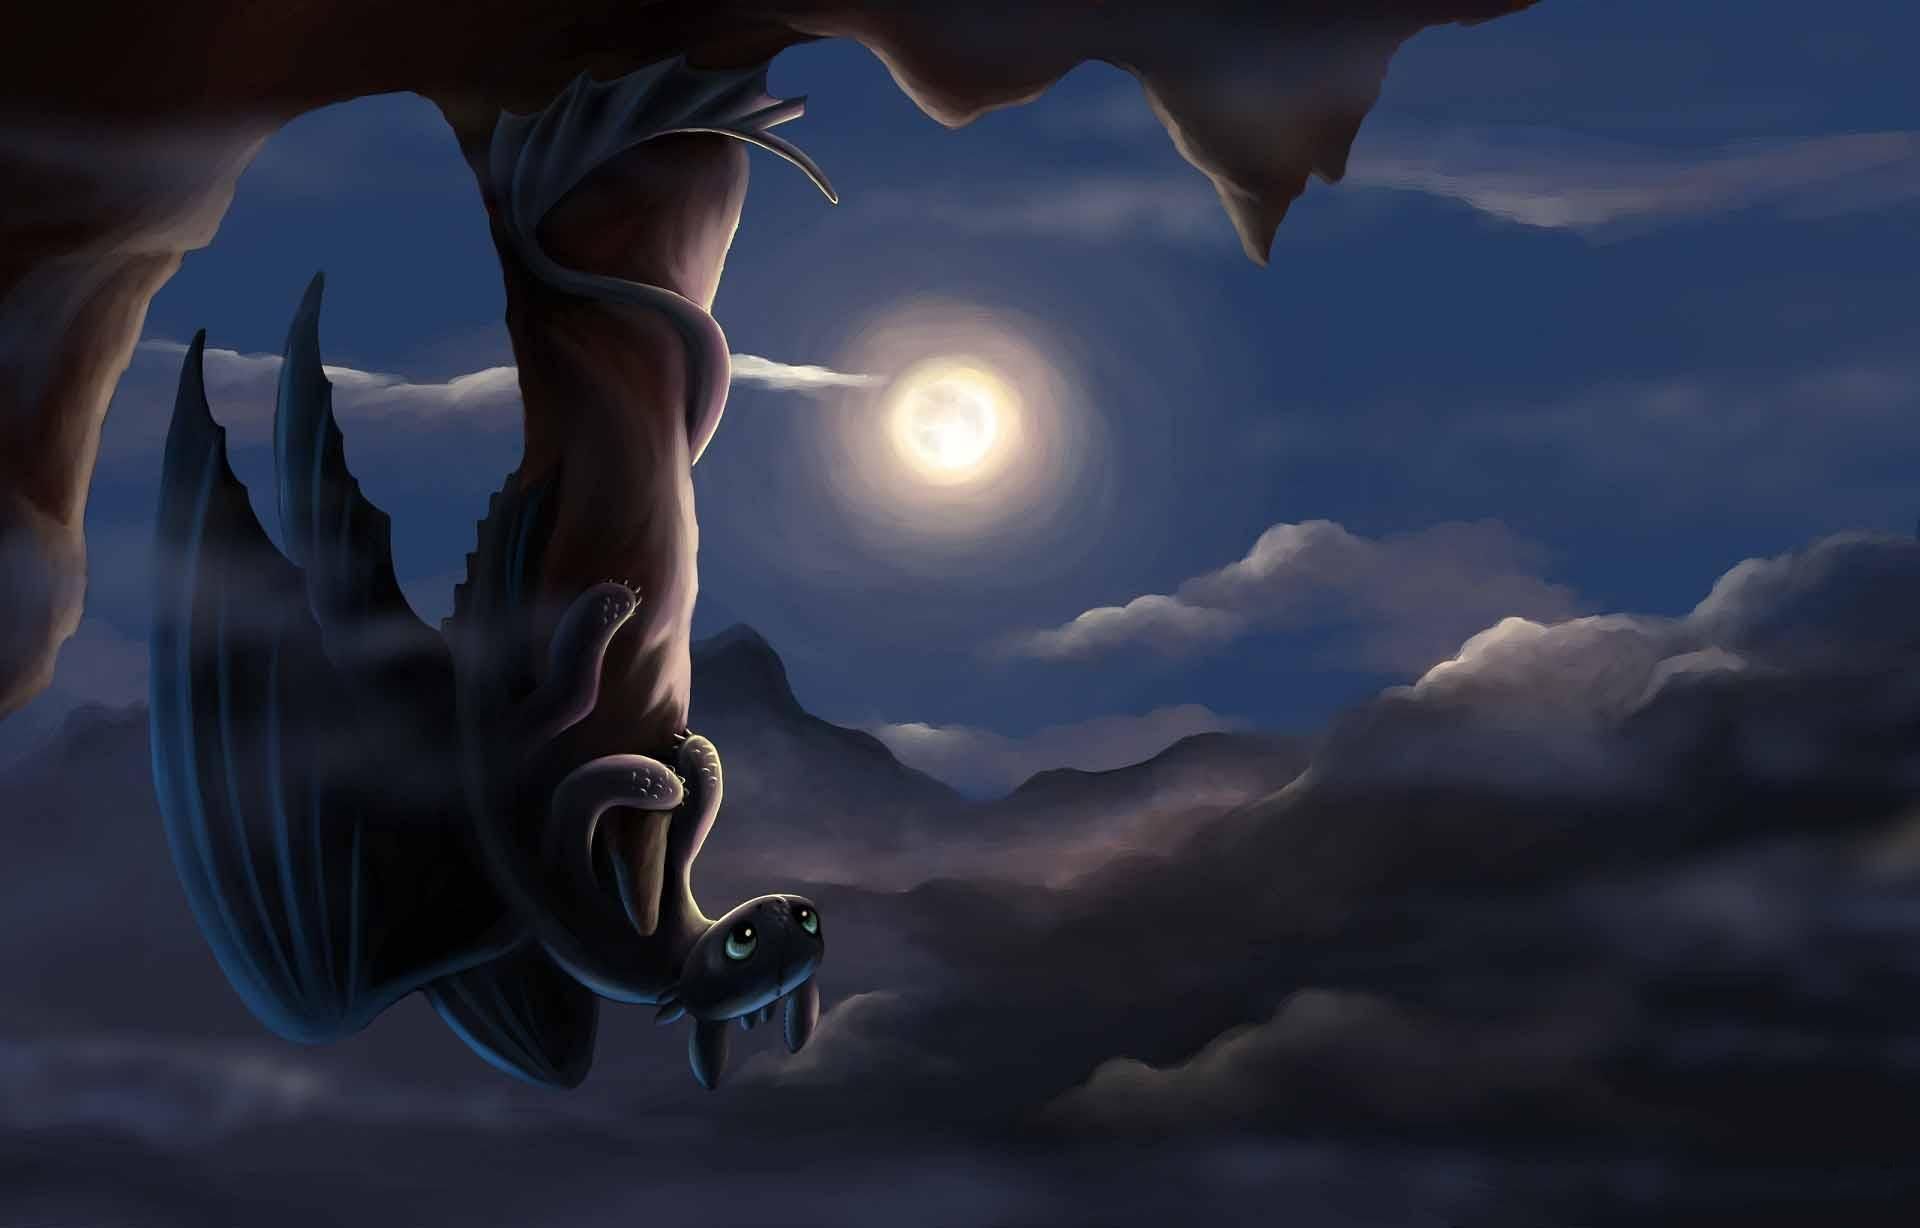 How TO Train Your Dragon 2 HD Wallpapers | Cool Wallpapers